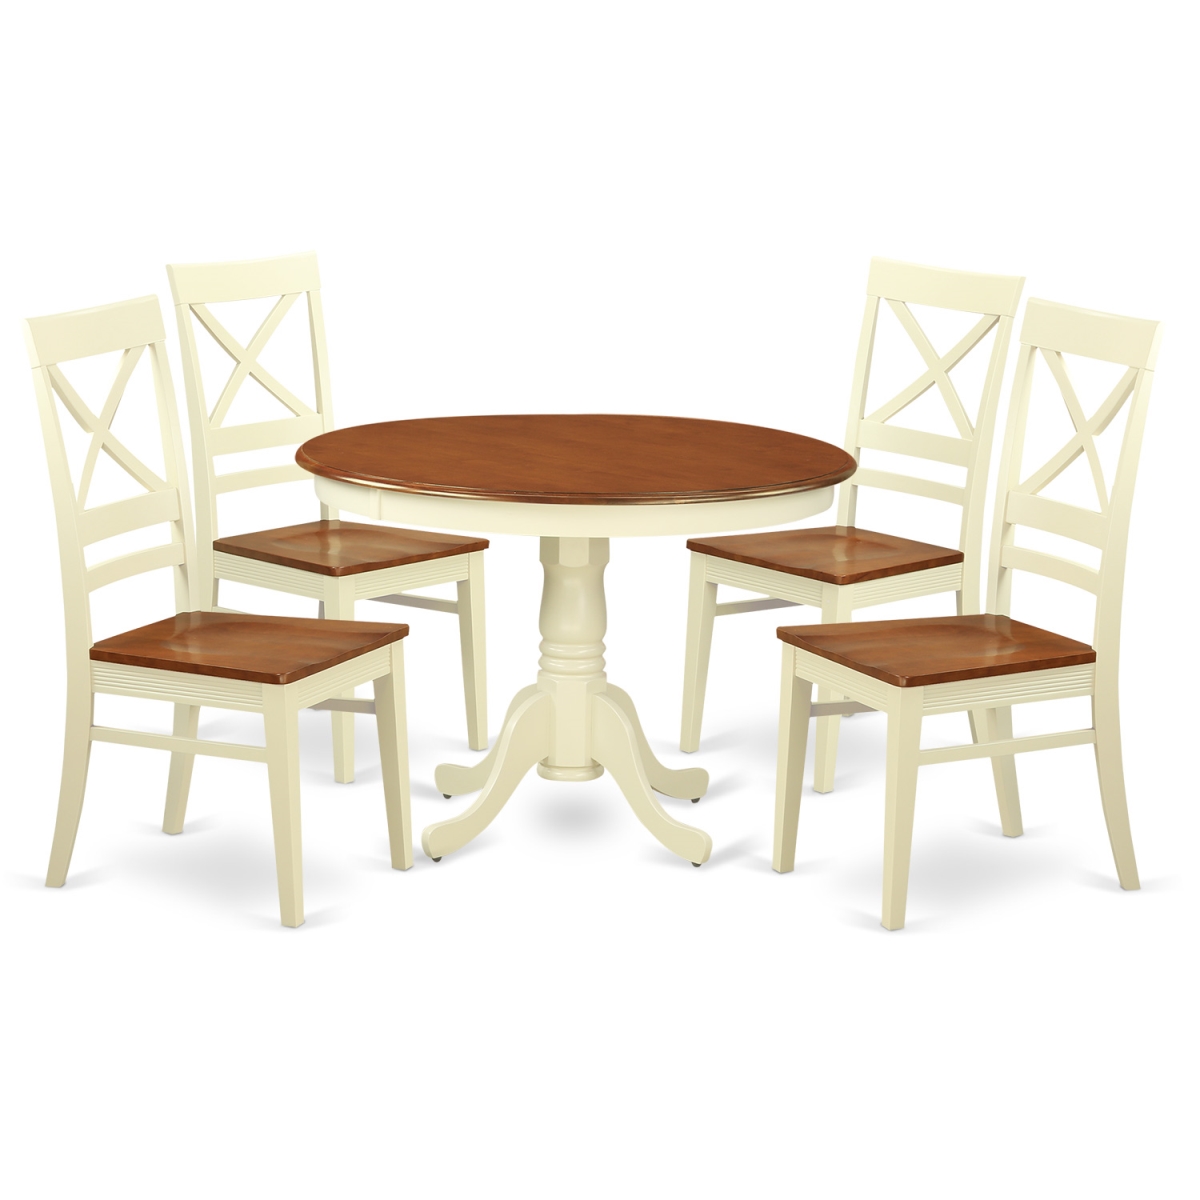 Picture of East West Furniture HLQU5-BMK-W Wood Seat Dining Set - One Round Table & Four Chairs with Buttermilk & Cherry - 5 Piece - 42 in.